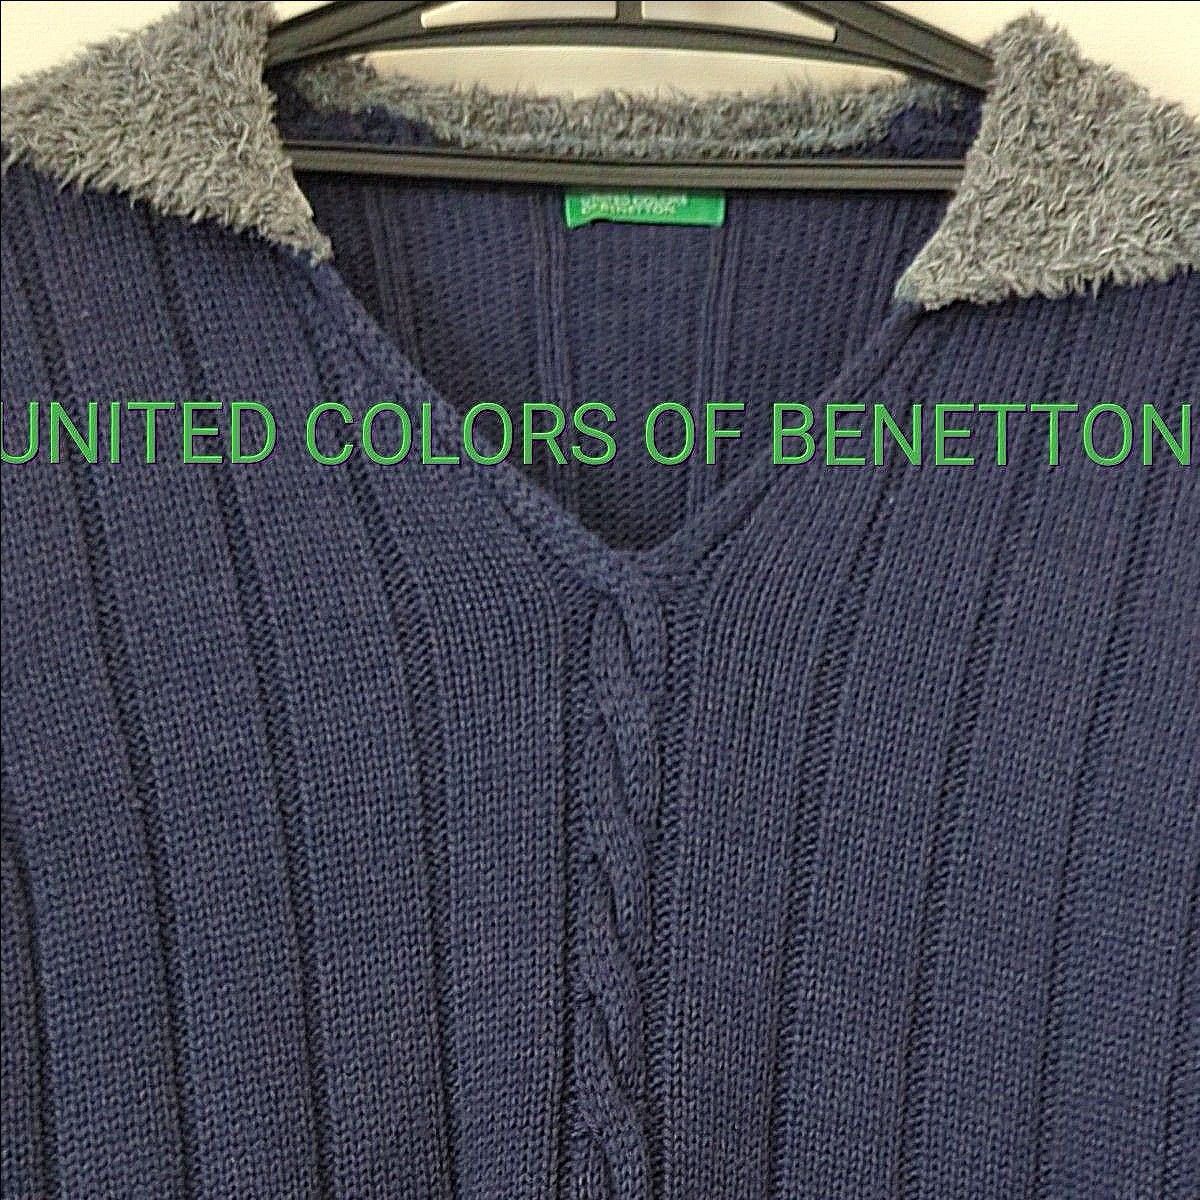 UNITED COLORS OF BENETTON ニット ワンピース レディース made in Italy｜PayPayフリマ